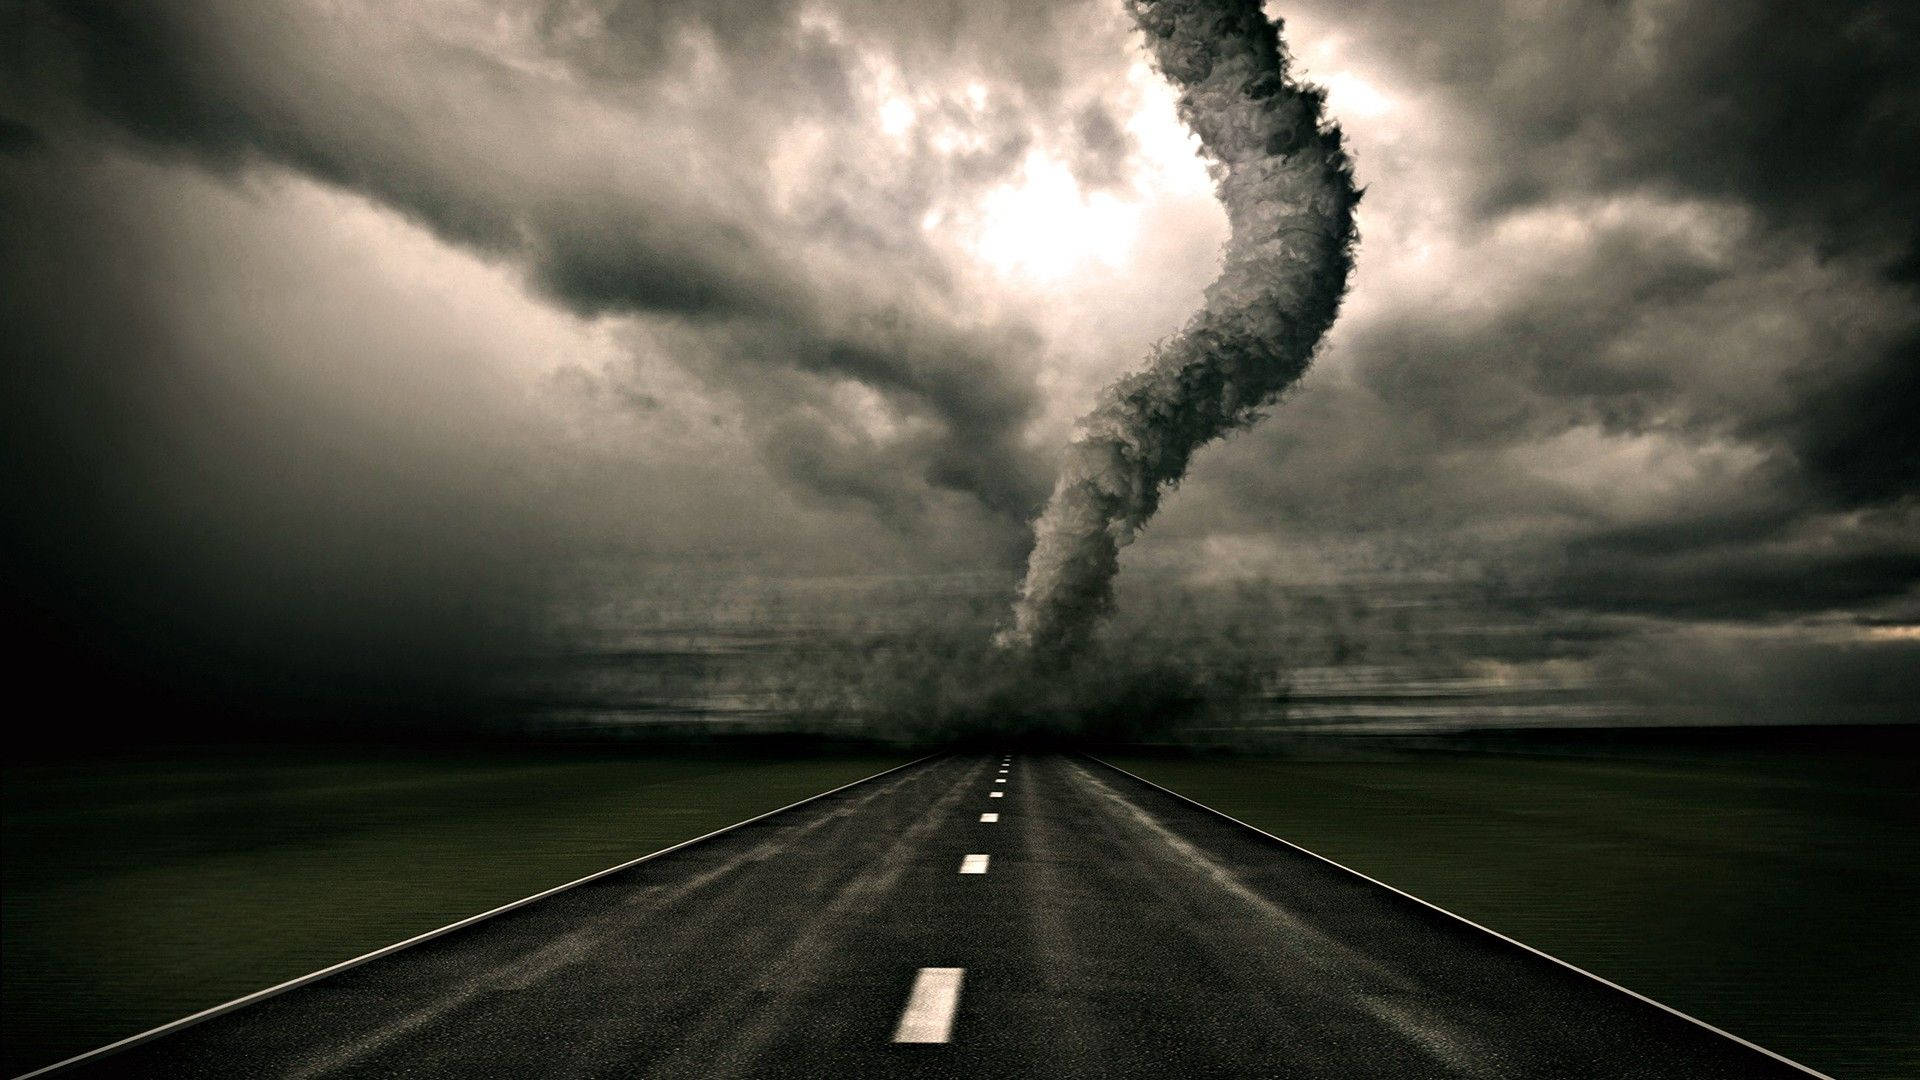 Blank And White Tornado On Road Wallpaper